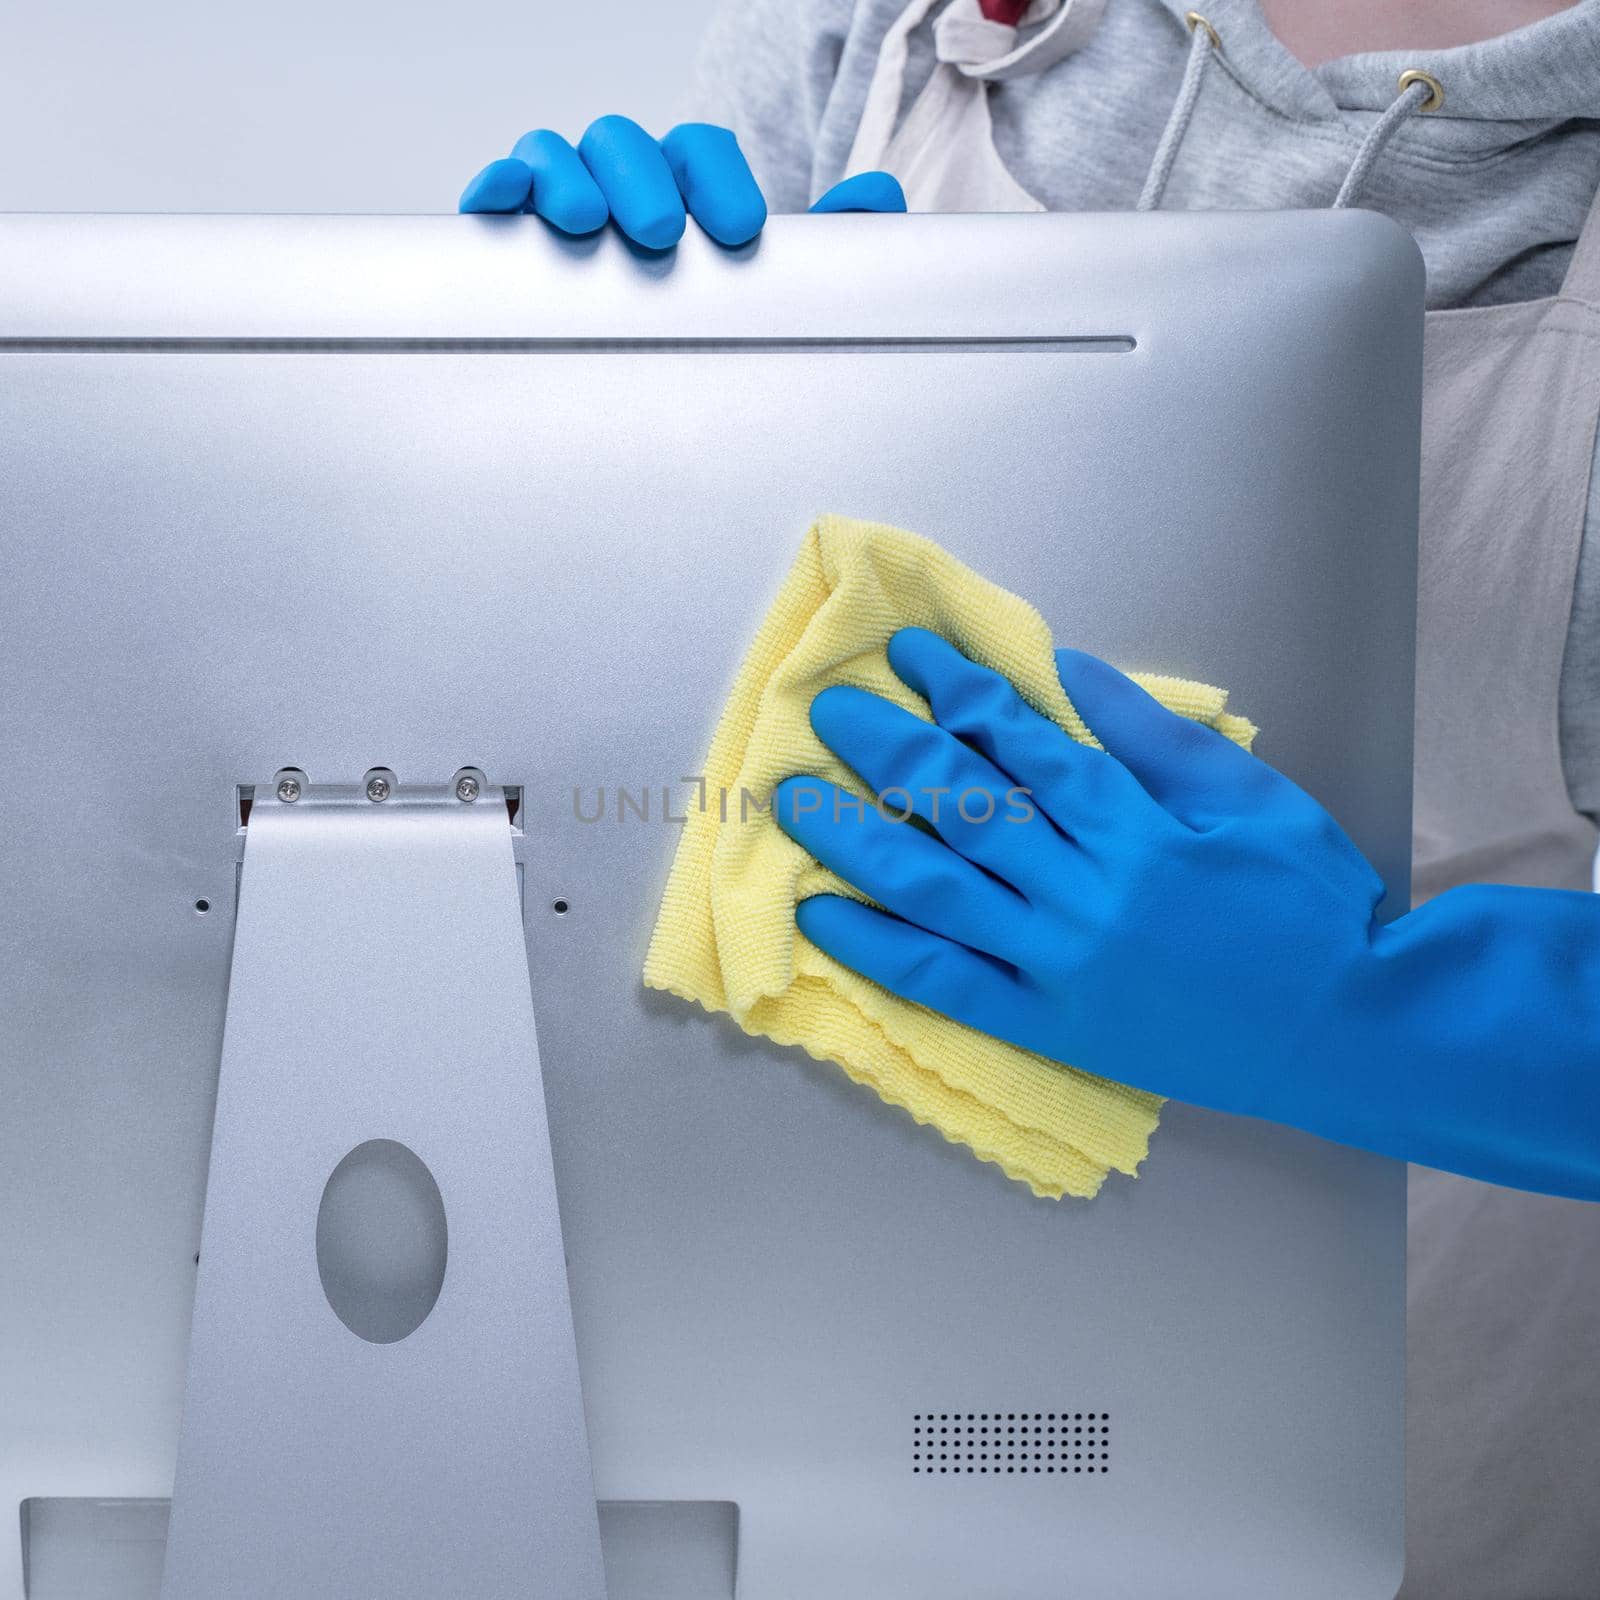 Young woman housekeeper in apron is cleaning silver computer surface with blue gloves, wet yellow rag, close up, copy space, blank design concept.